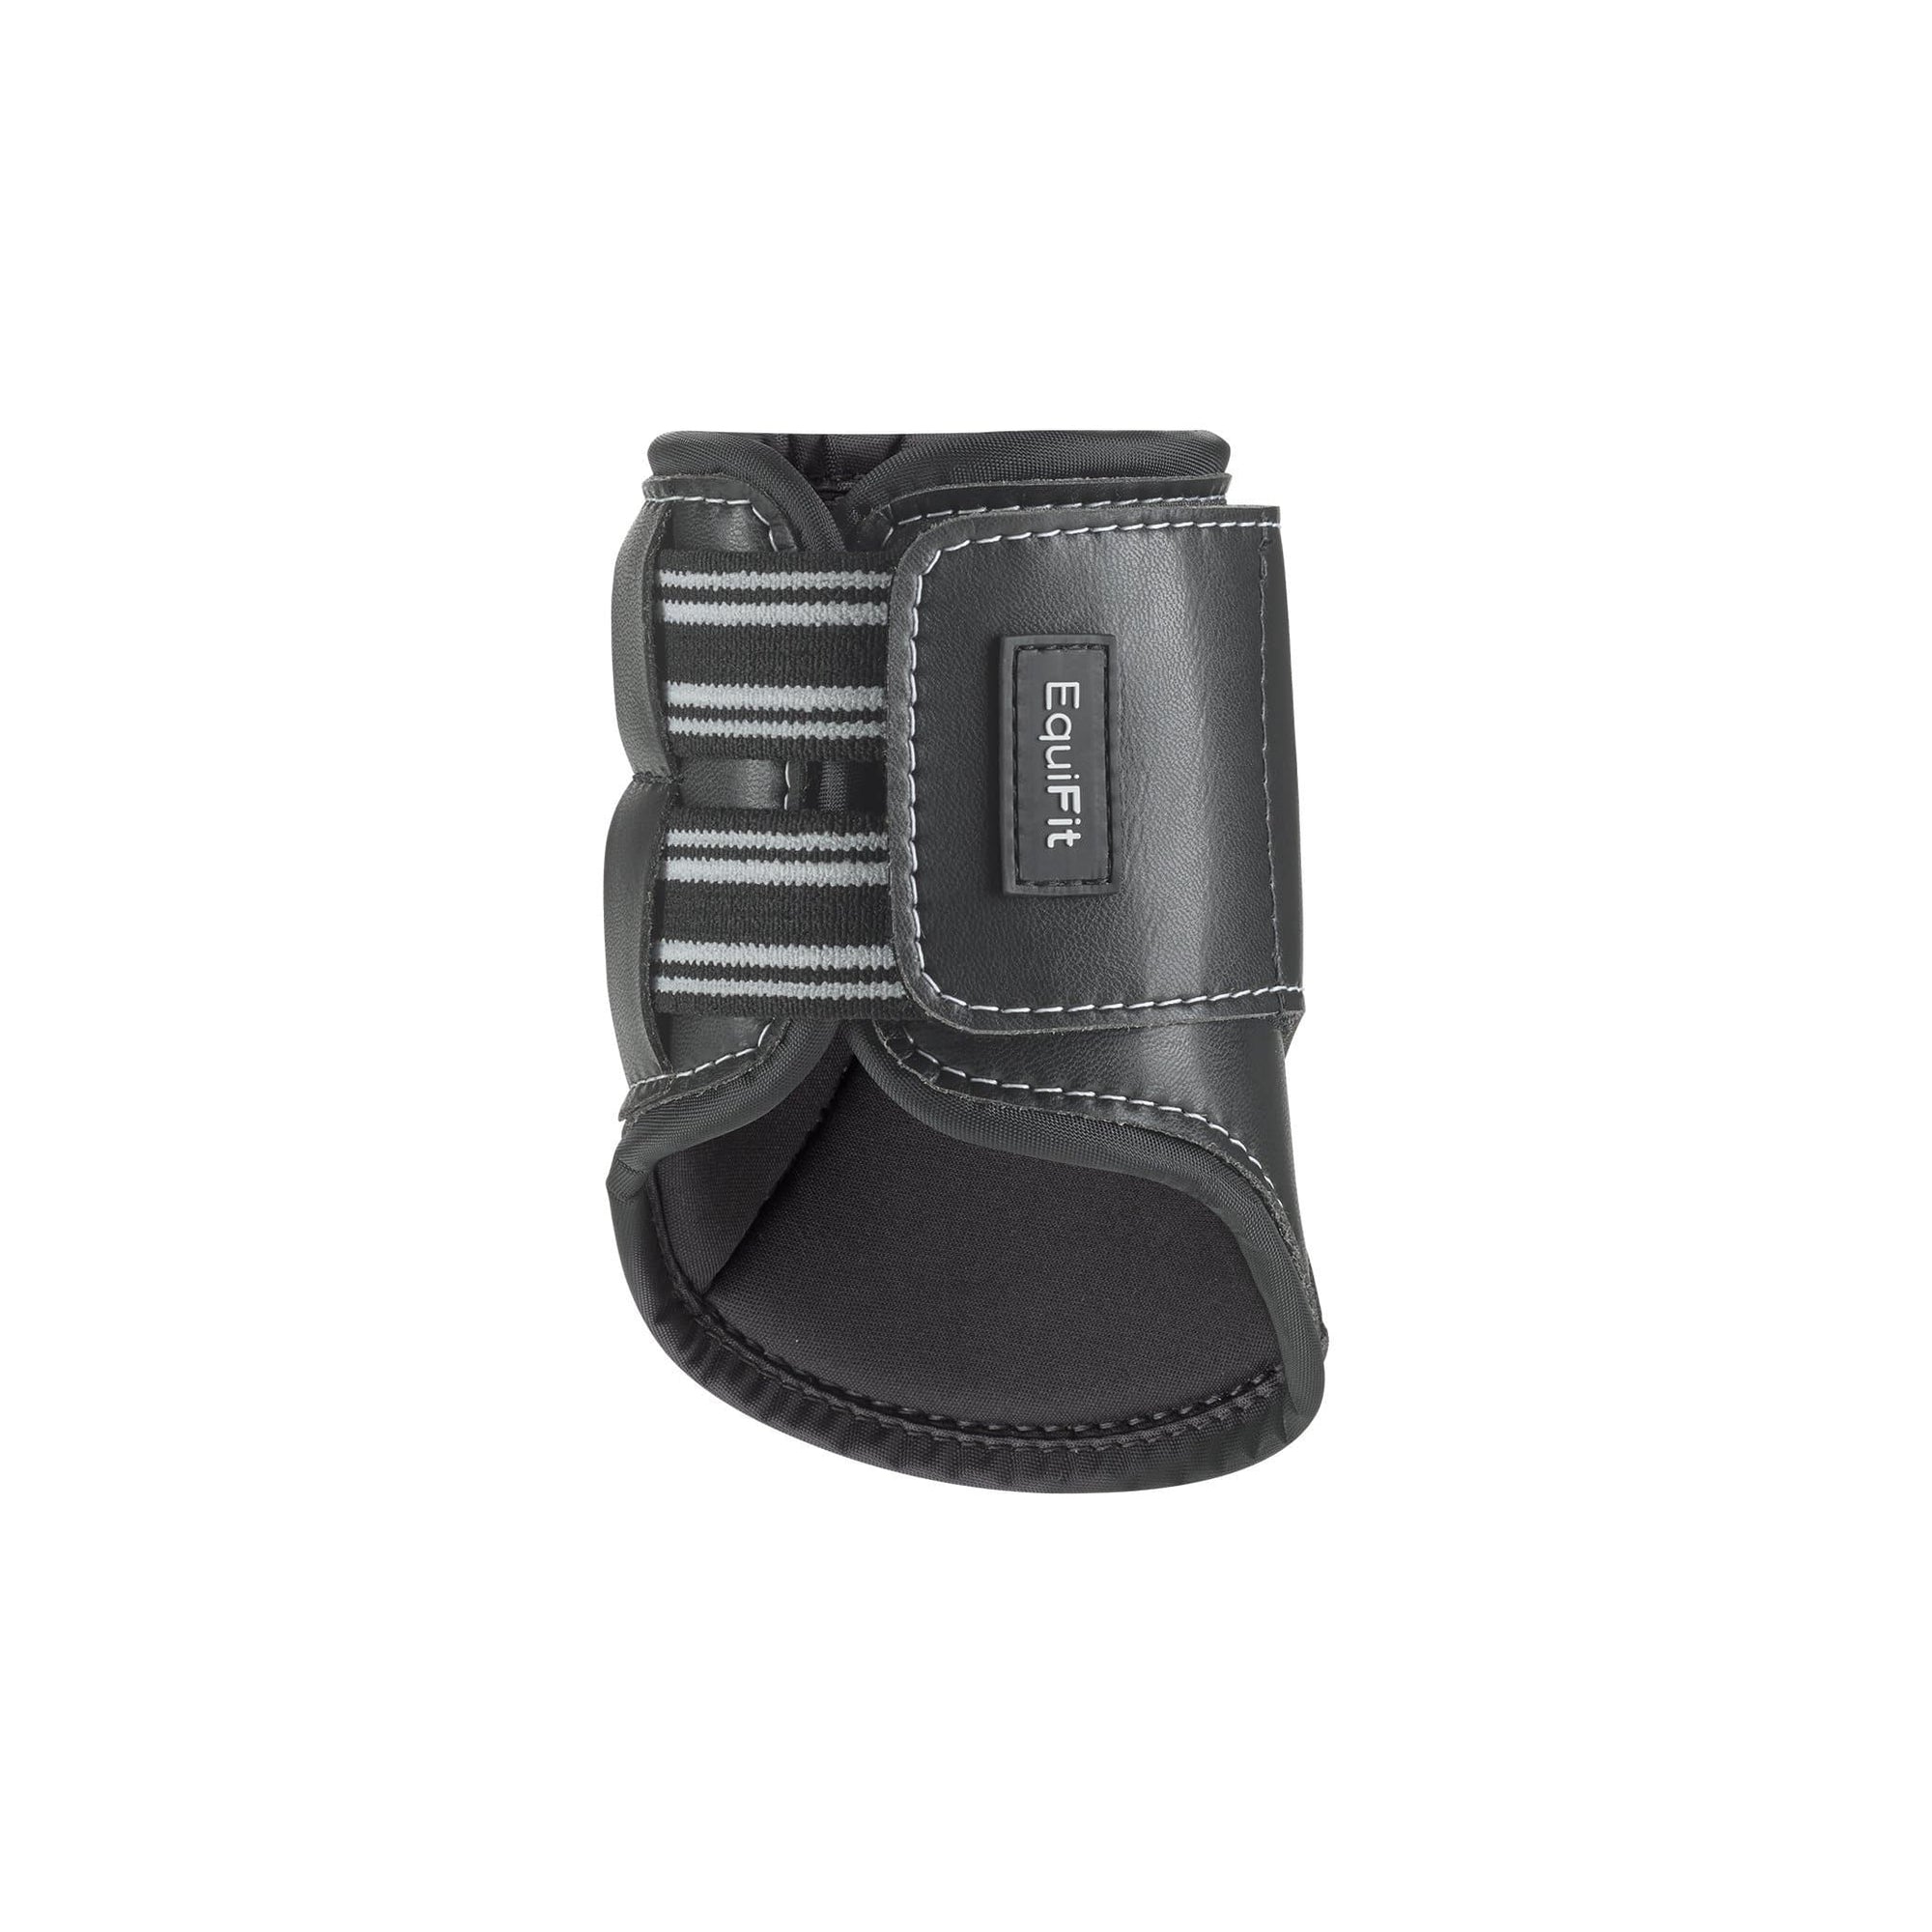 MultiTeq Hind Boot with ImpacTeq Liner offers Full Coverage Protection, perfect for daily turnout and exercise